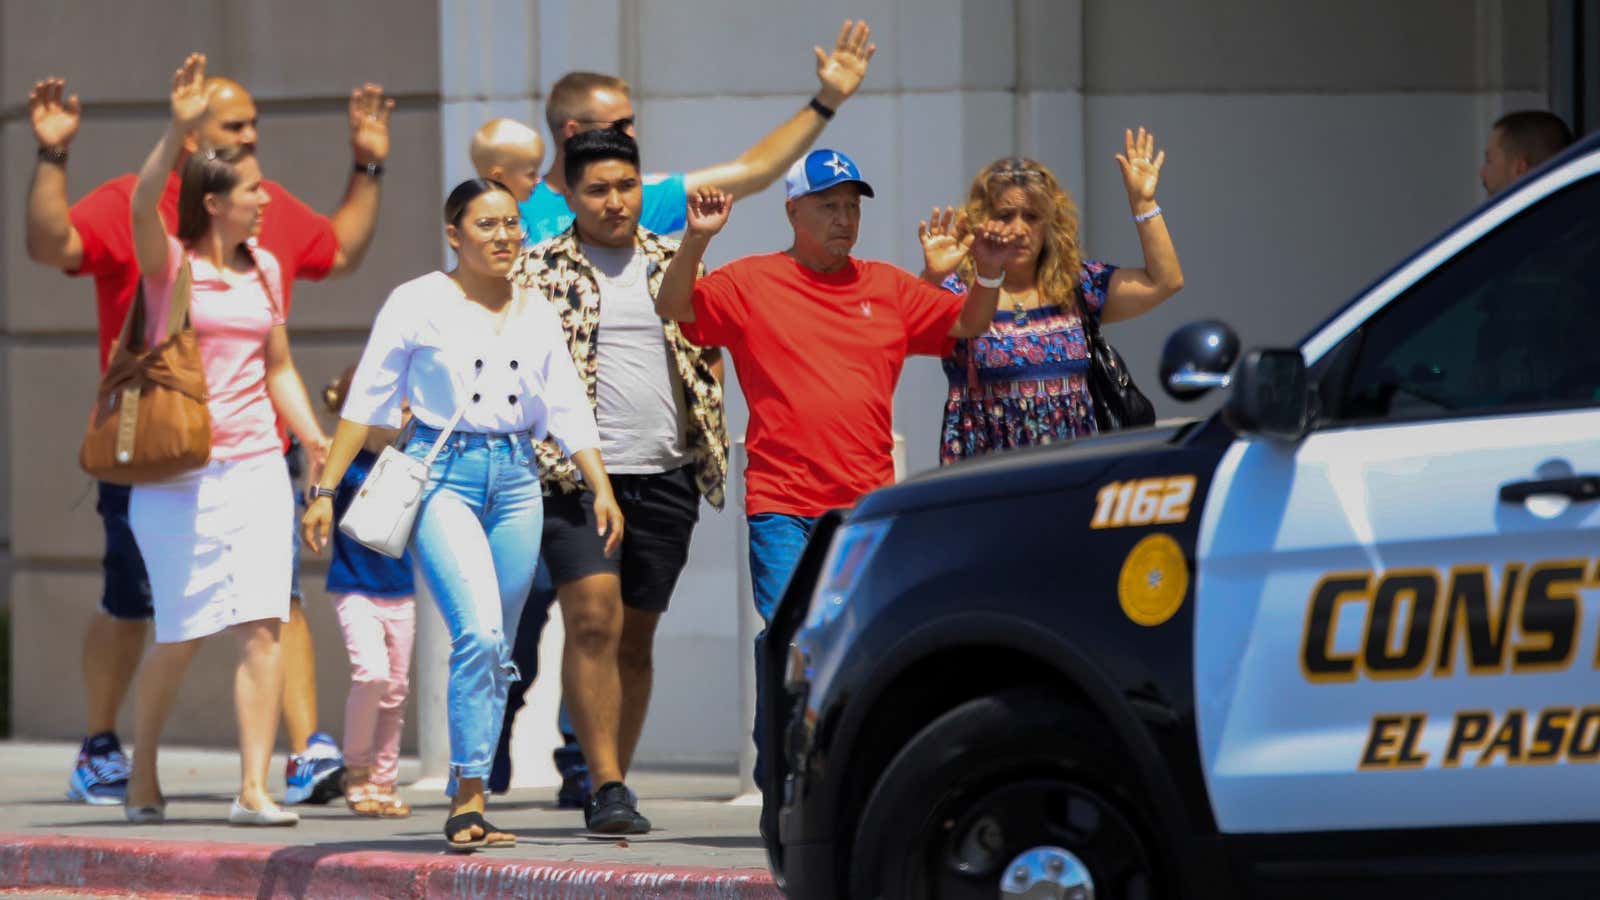 Shoppers exited the El Paso mall with their hands up following a mass shooting.